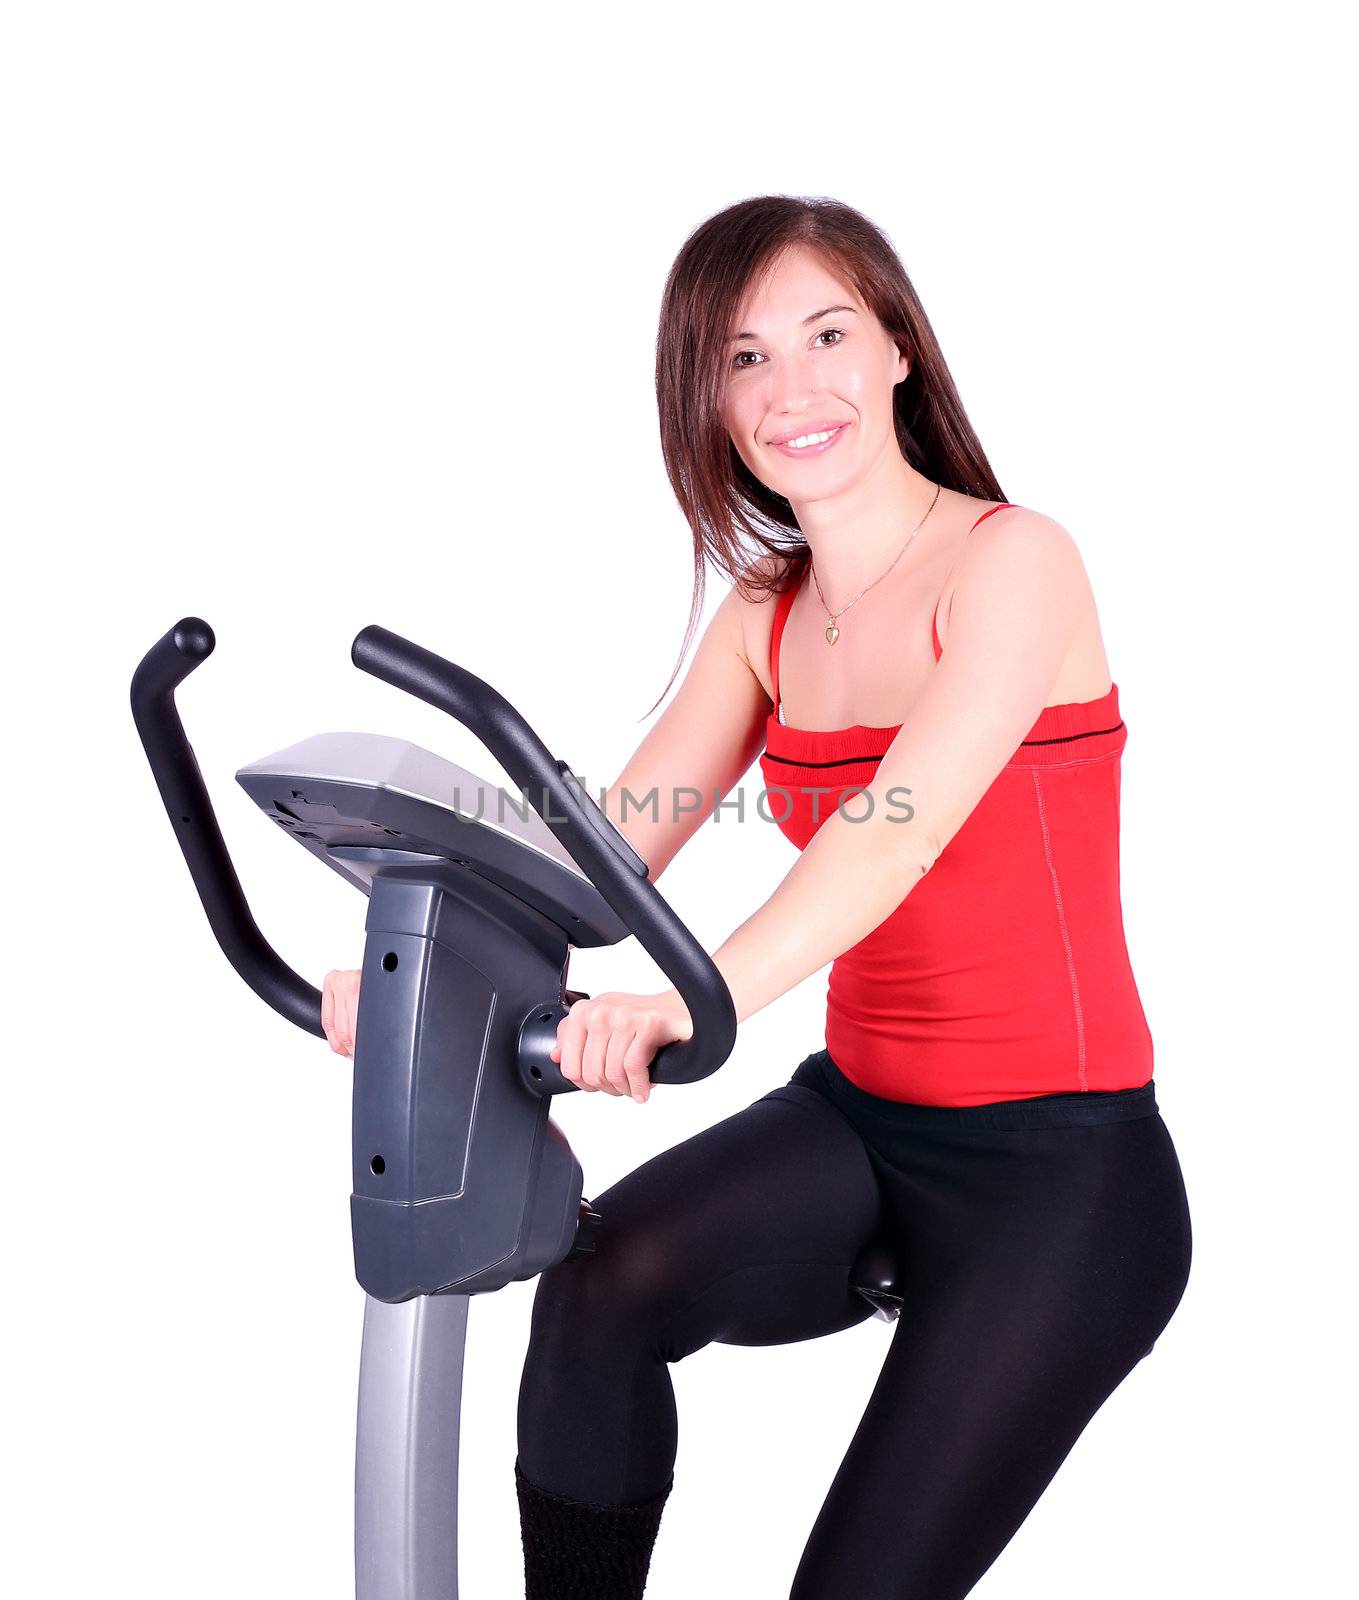 girl exercise with fitness cross trainer by goce